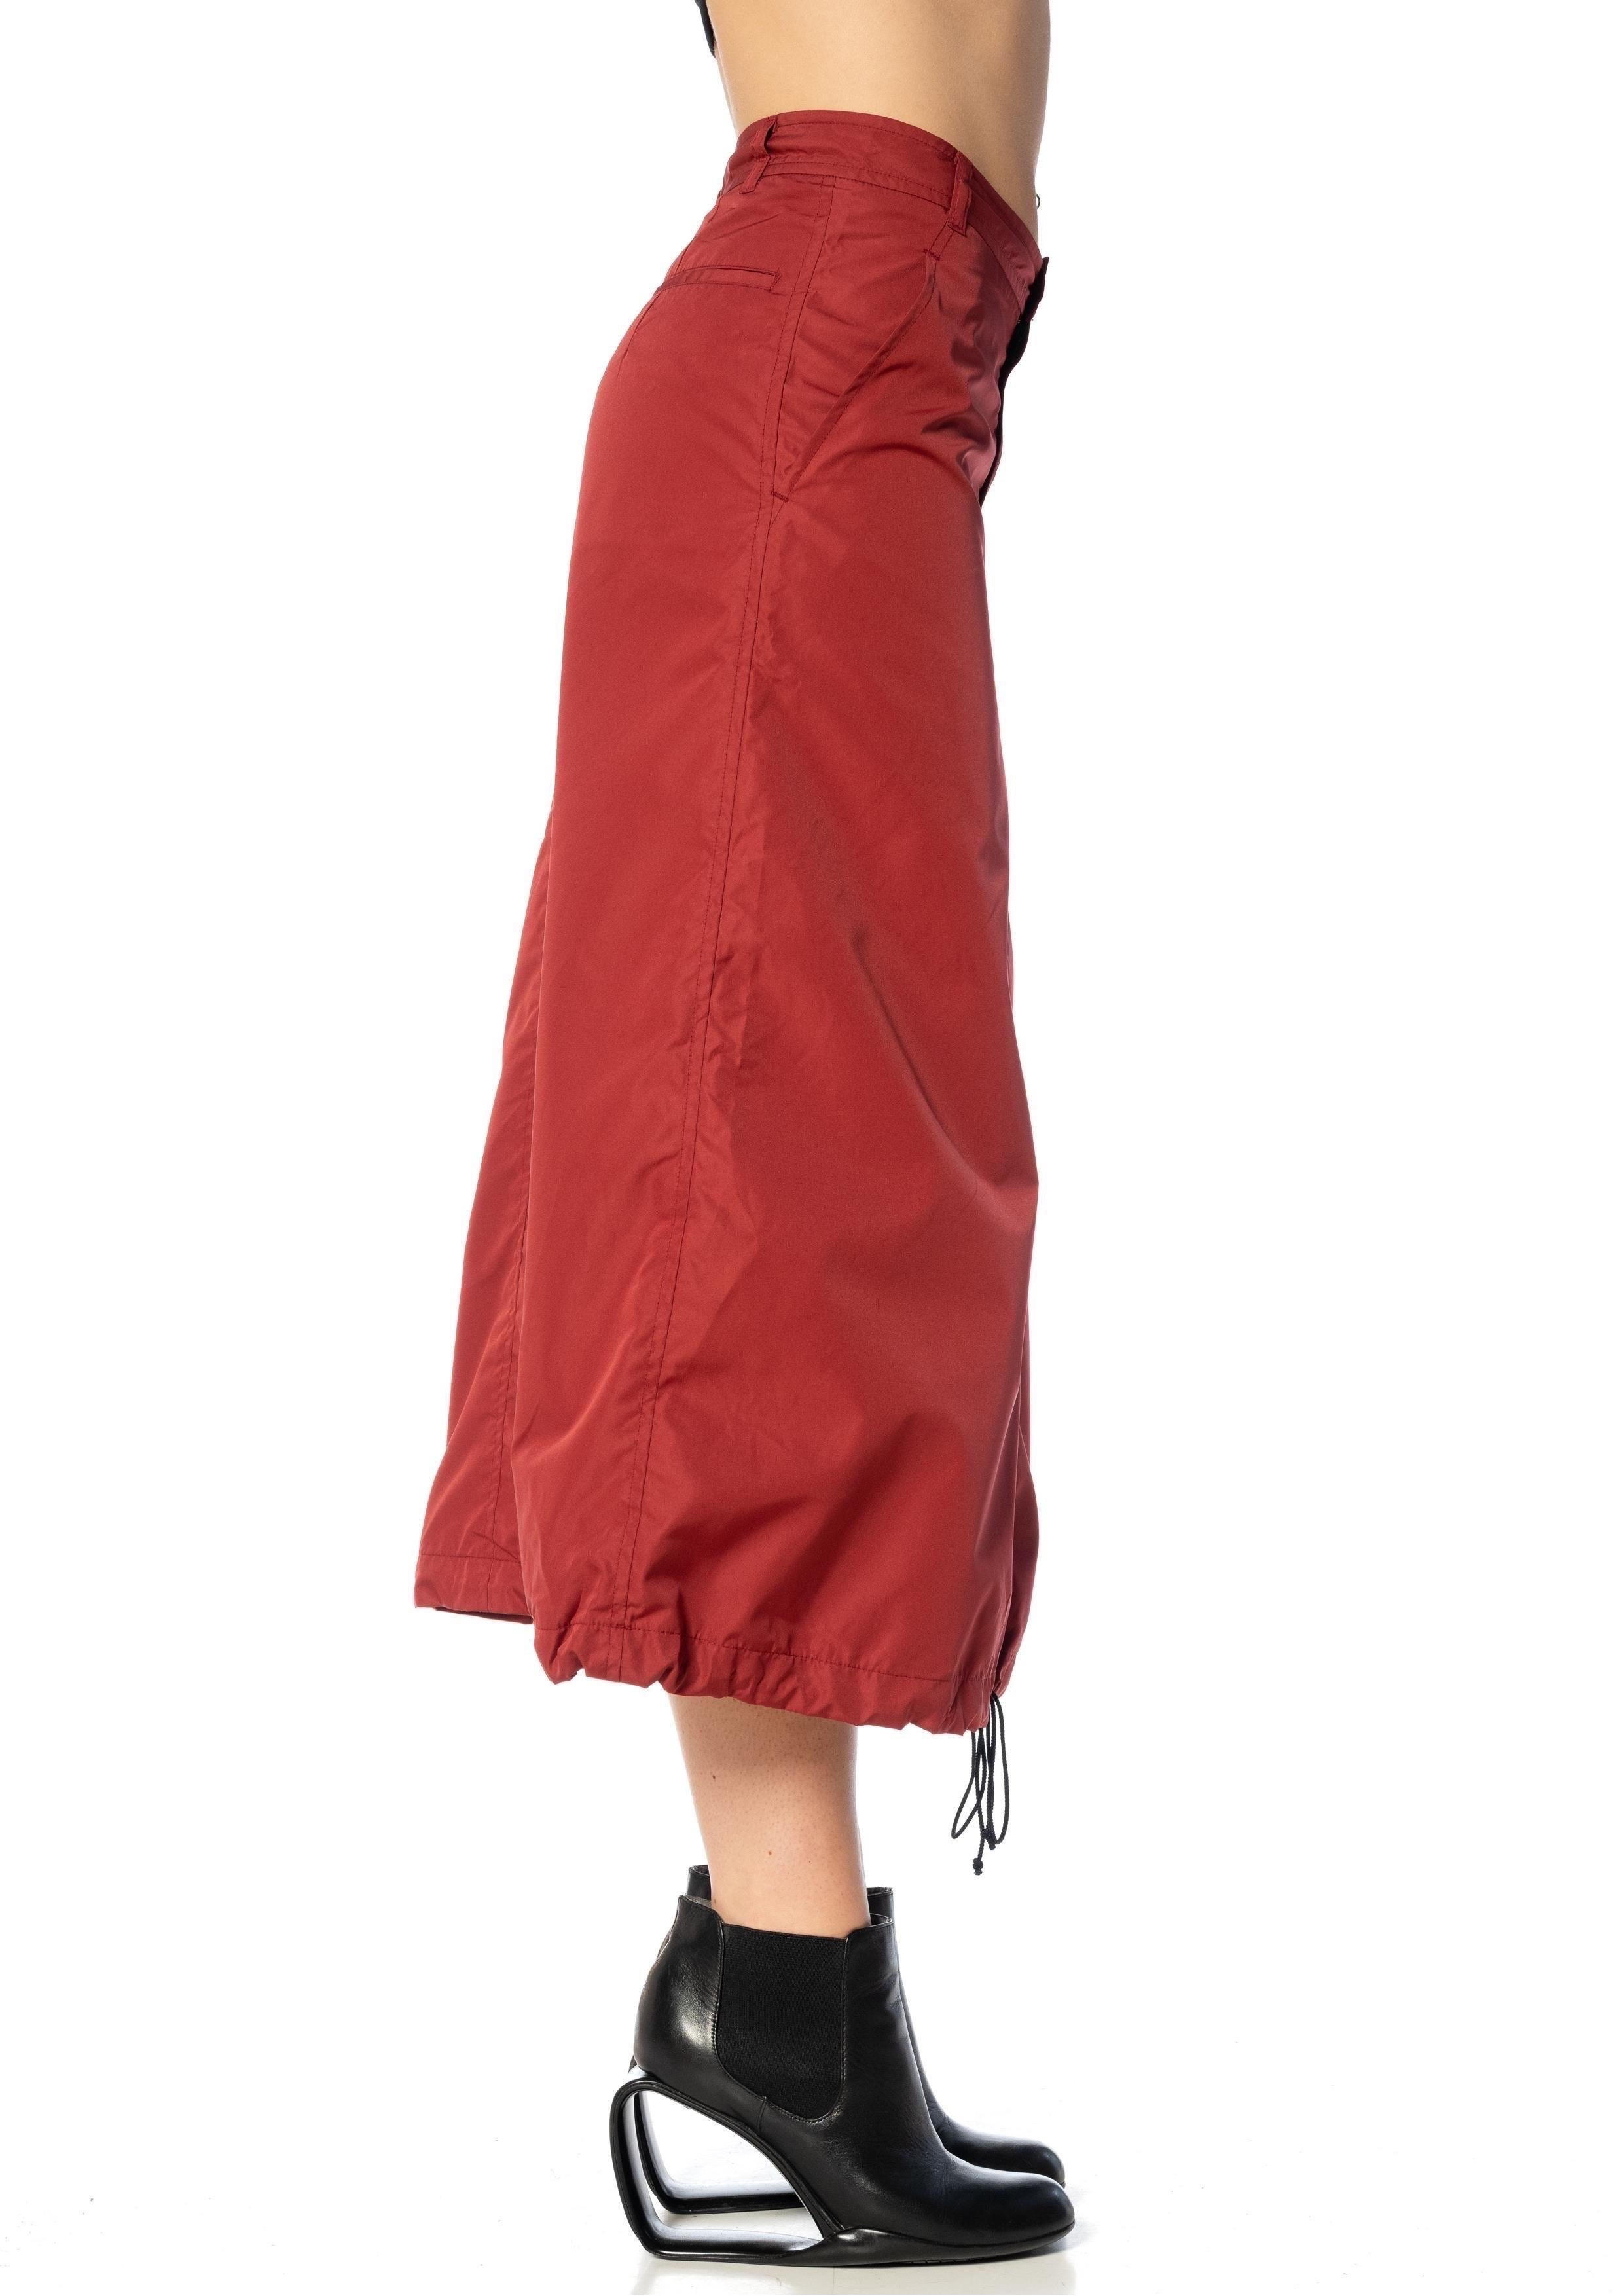 Women's 2000S COMME DES GARCONS Burgundy Polyester Parachute Skirt With Drawstring Hem  For Sale